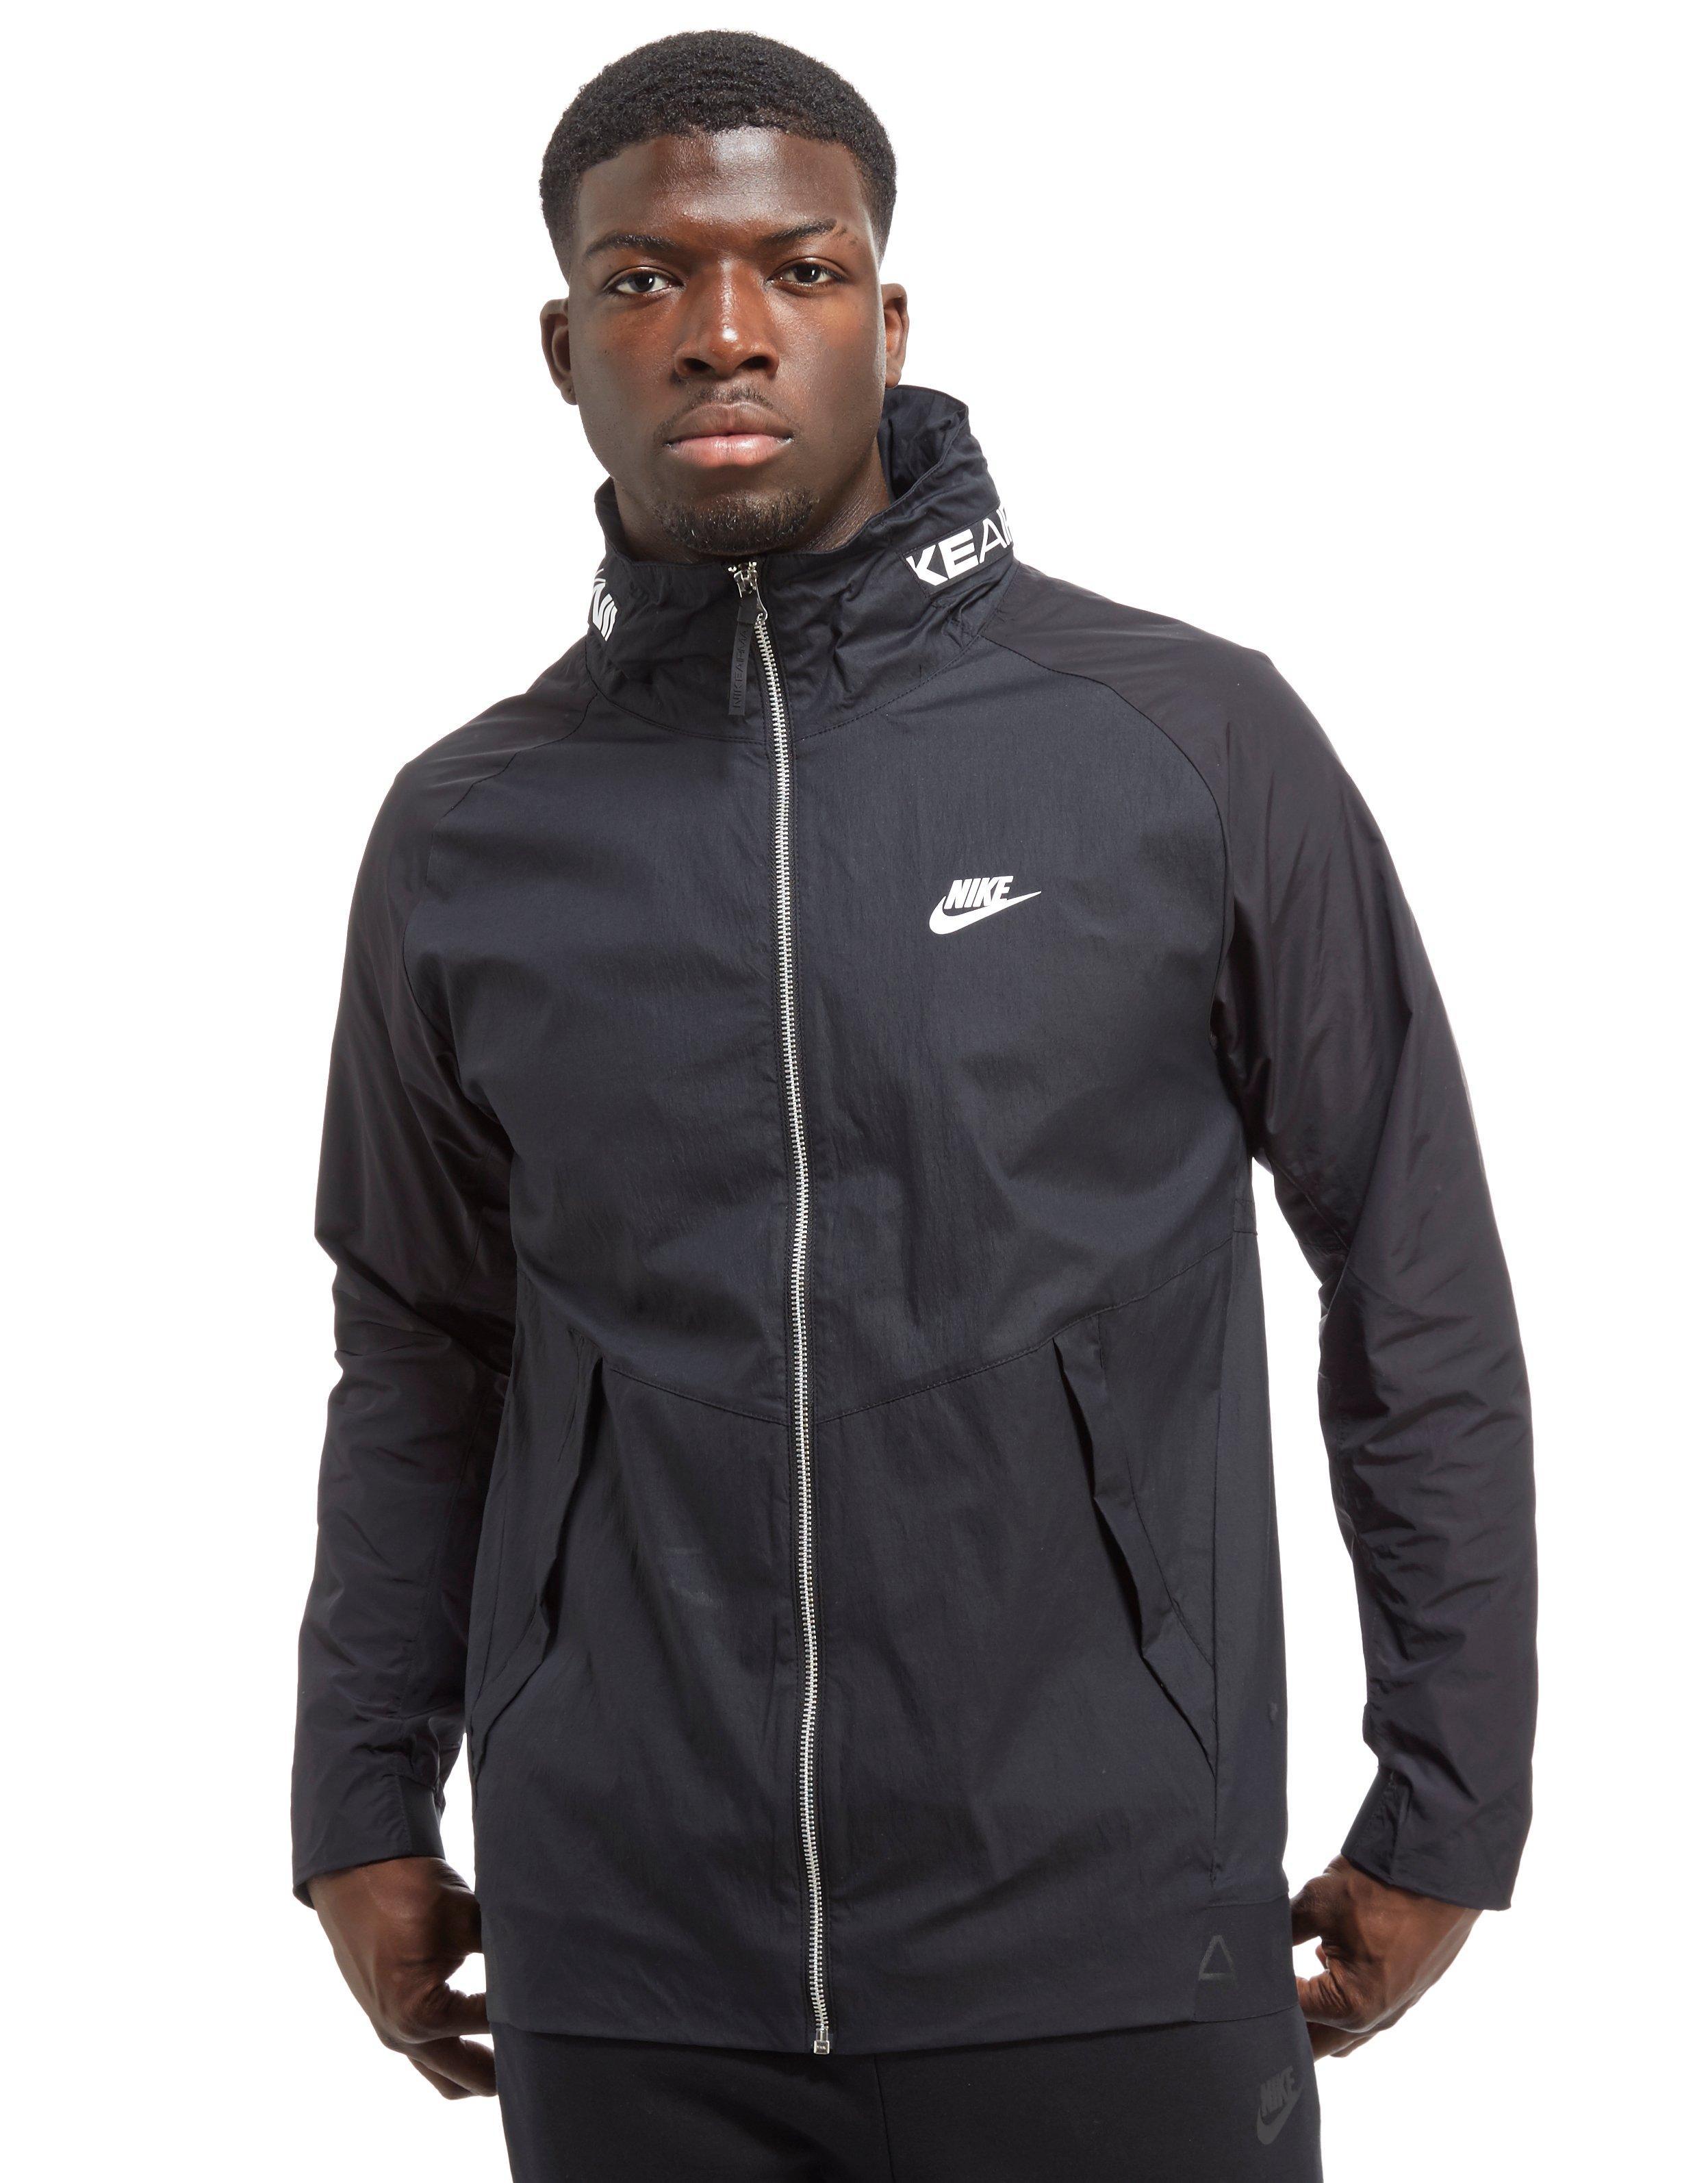 Nike Synthetic Air Max Jacket in Black for Men - Lyst